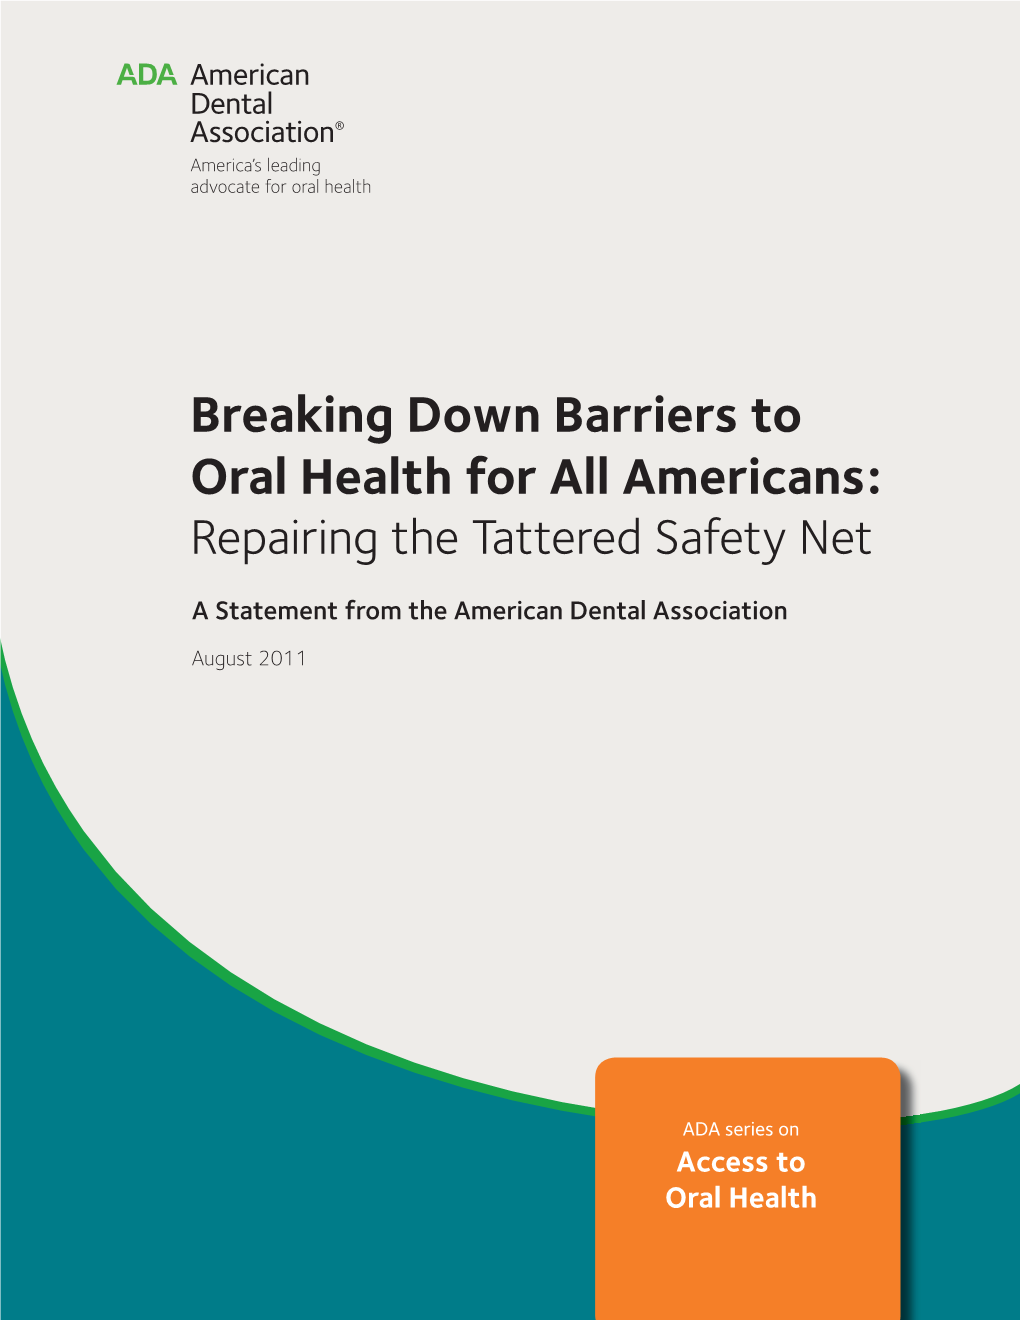 Breaking Down Barriers to Oral Health for All Americans: Repairing the Tattered Safety Net